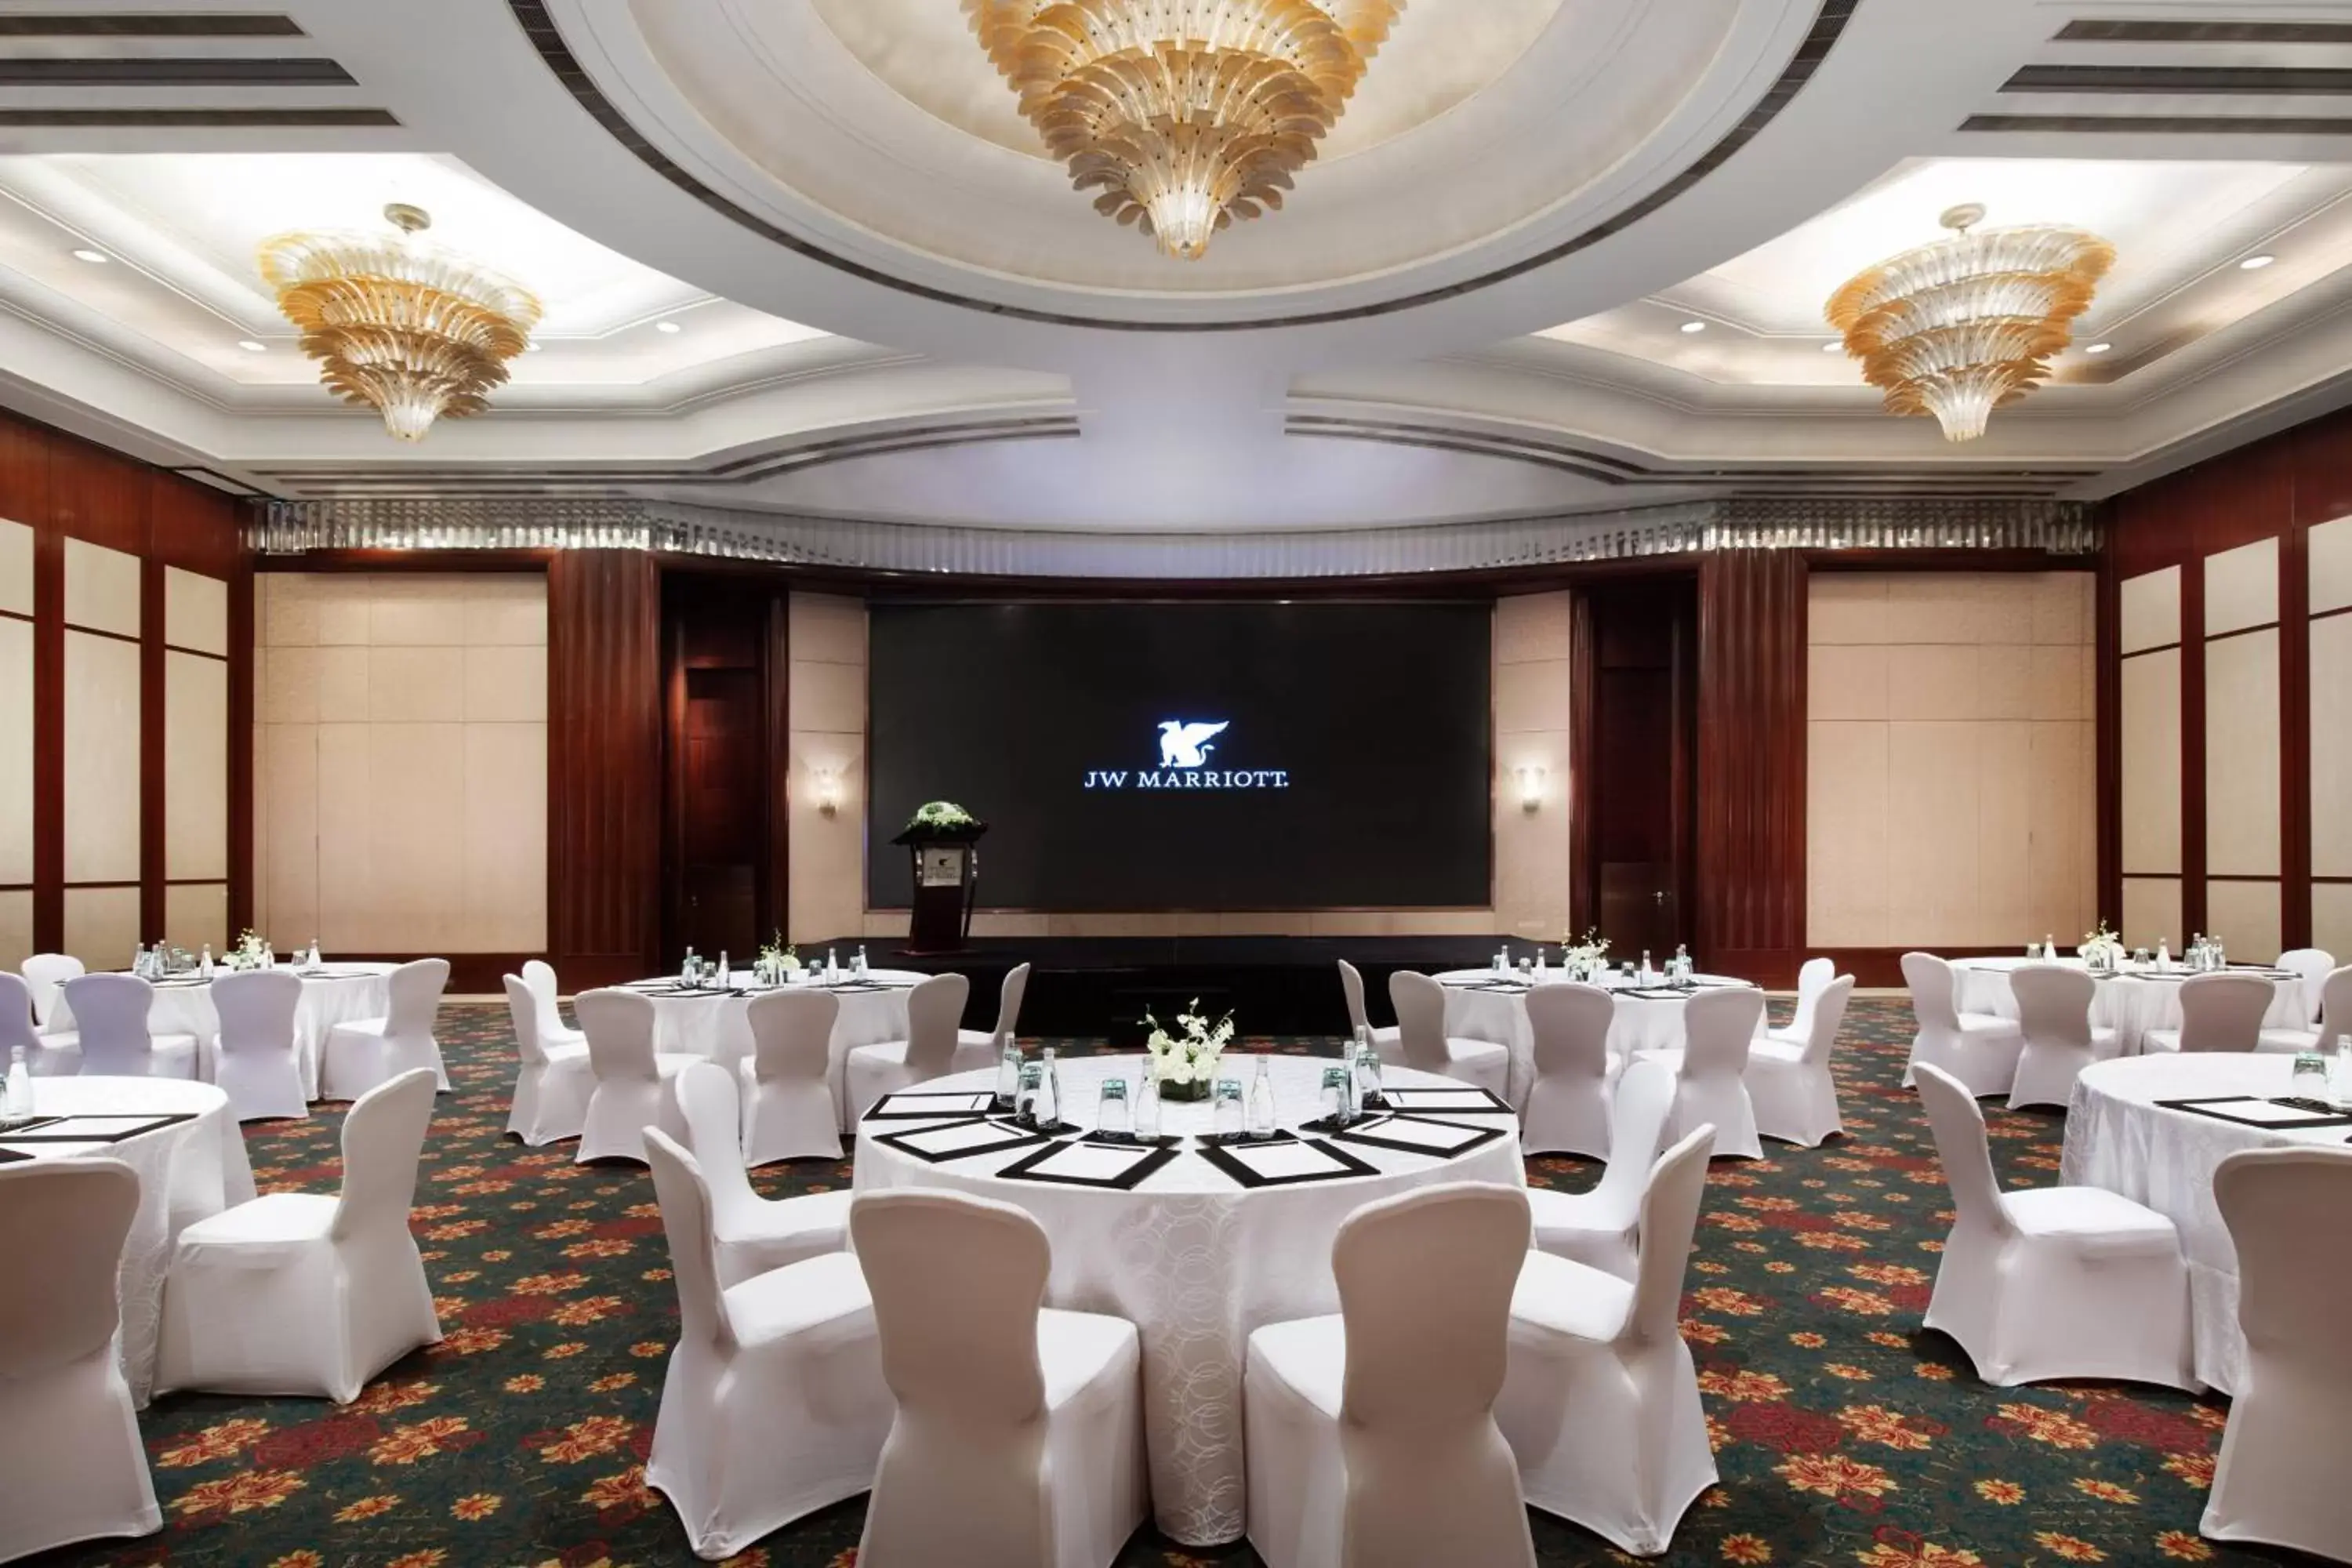 Meeting/conference room, Banquet Facilities in JW Marriott Shanghai at Tomorrow Square